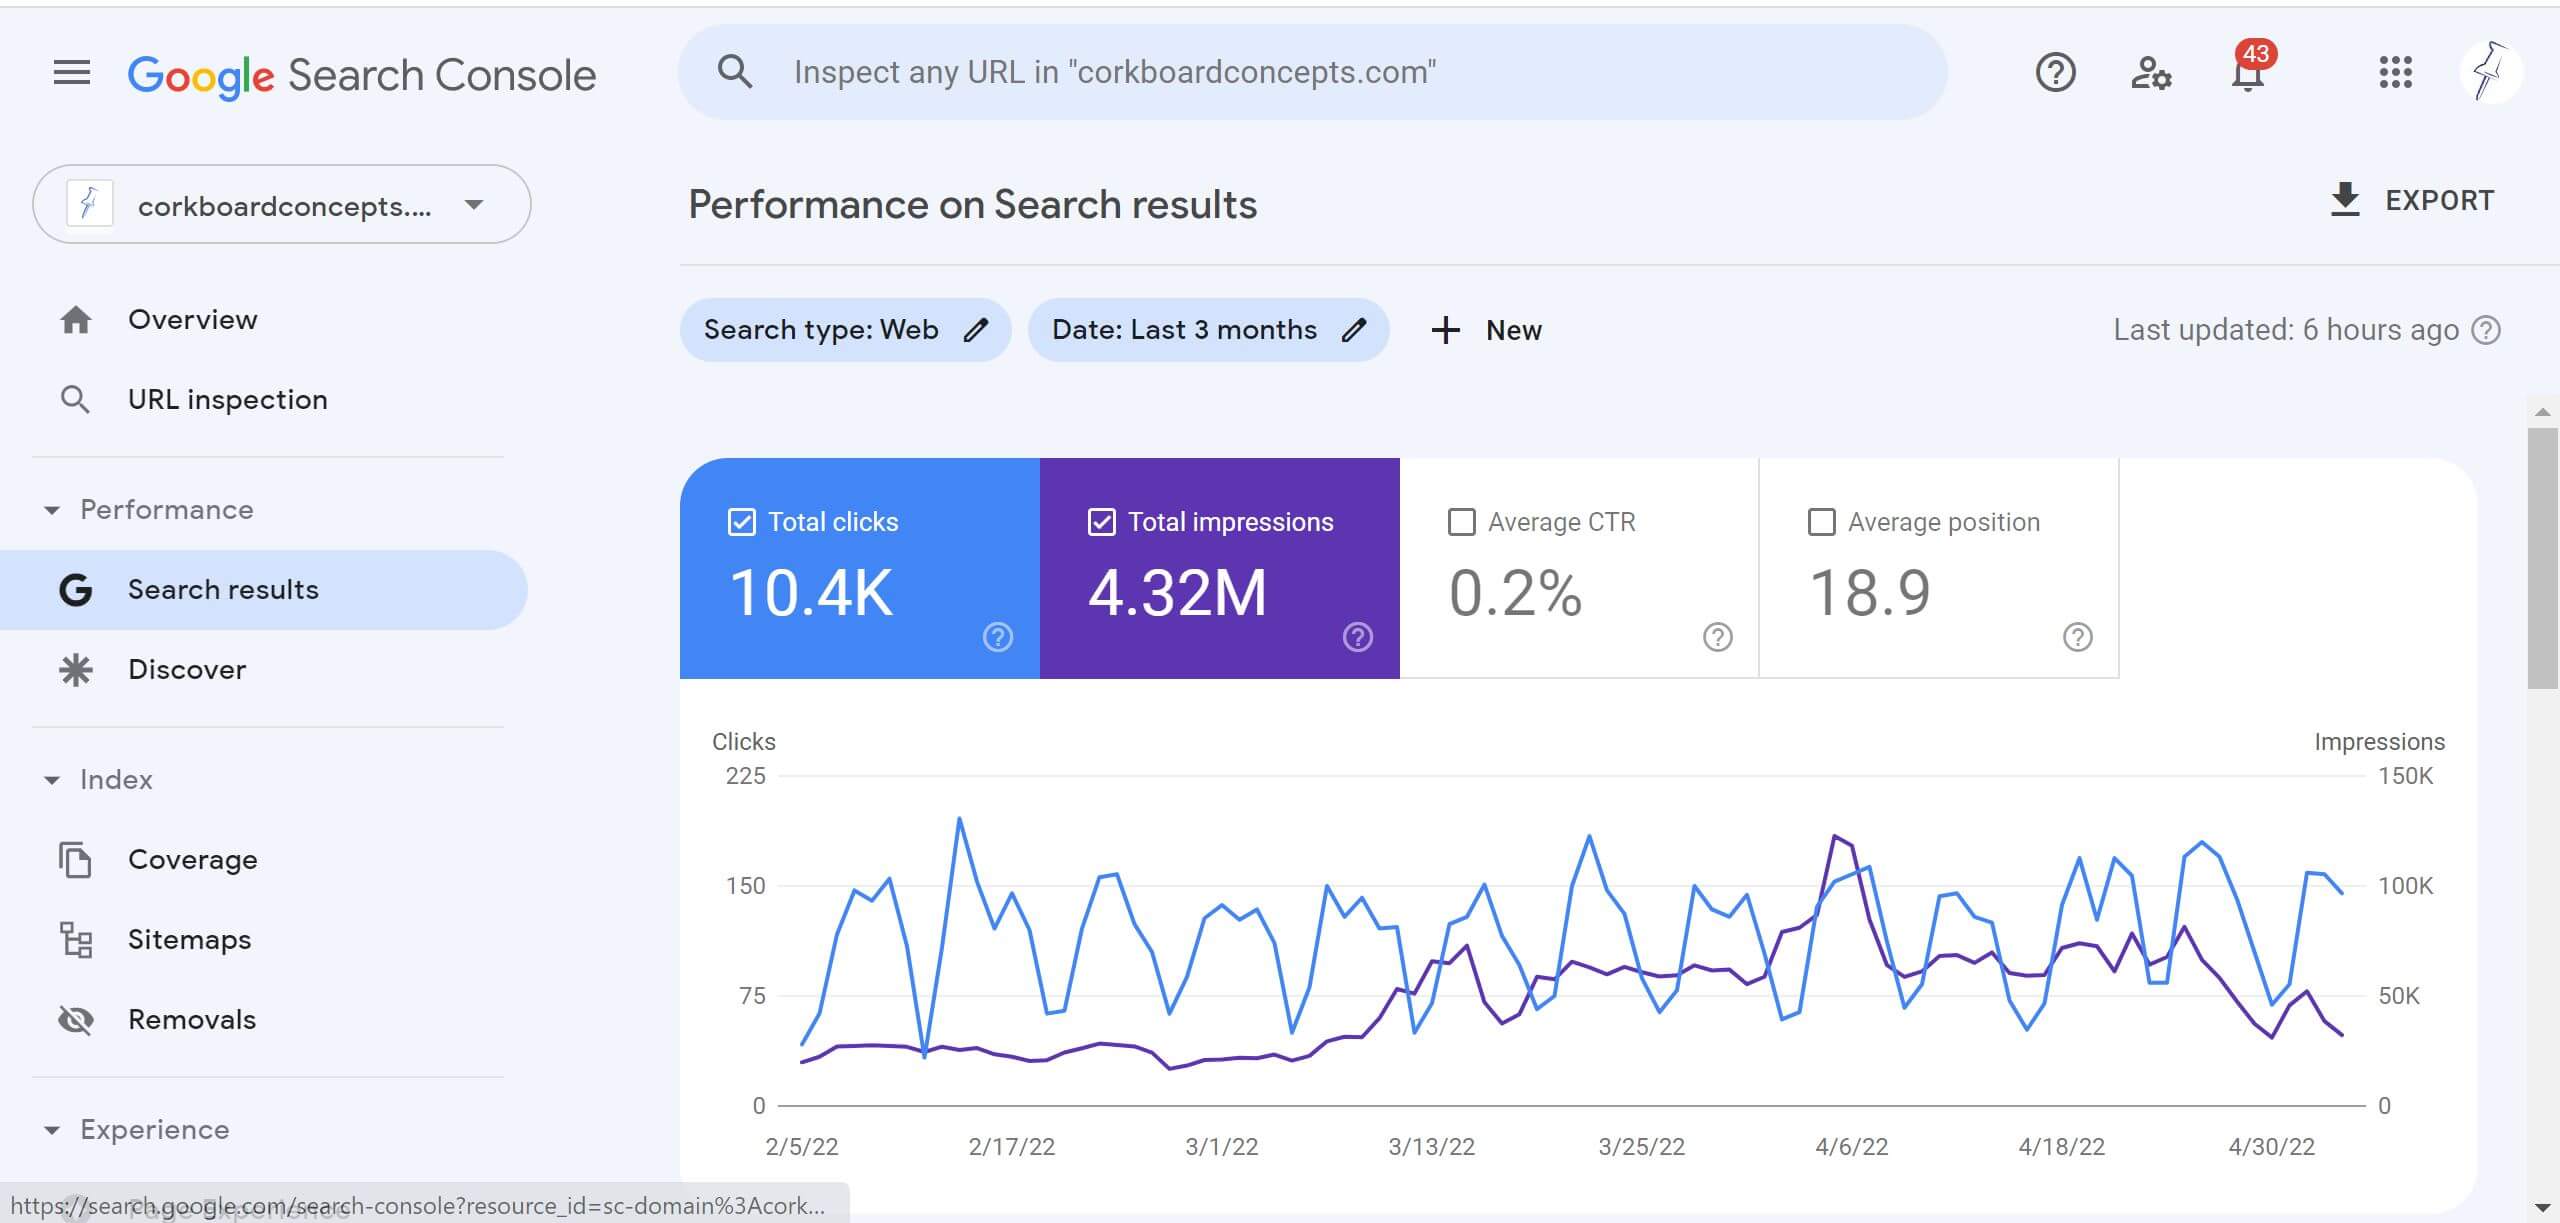 Google Search Console dashboard showing website performance with clicks, impressions, and average position data.